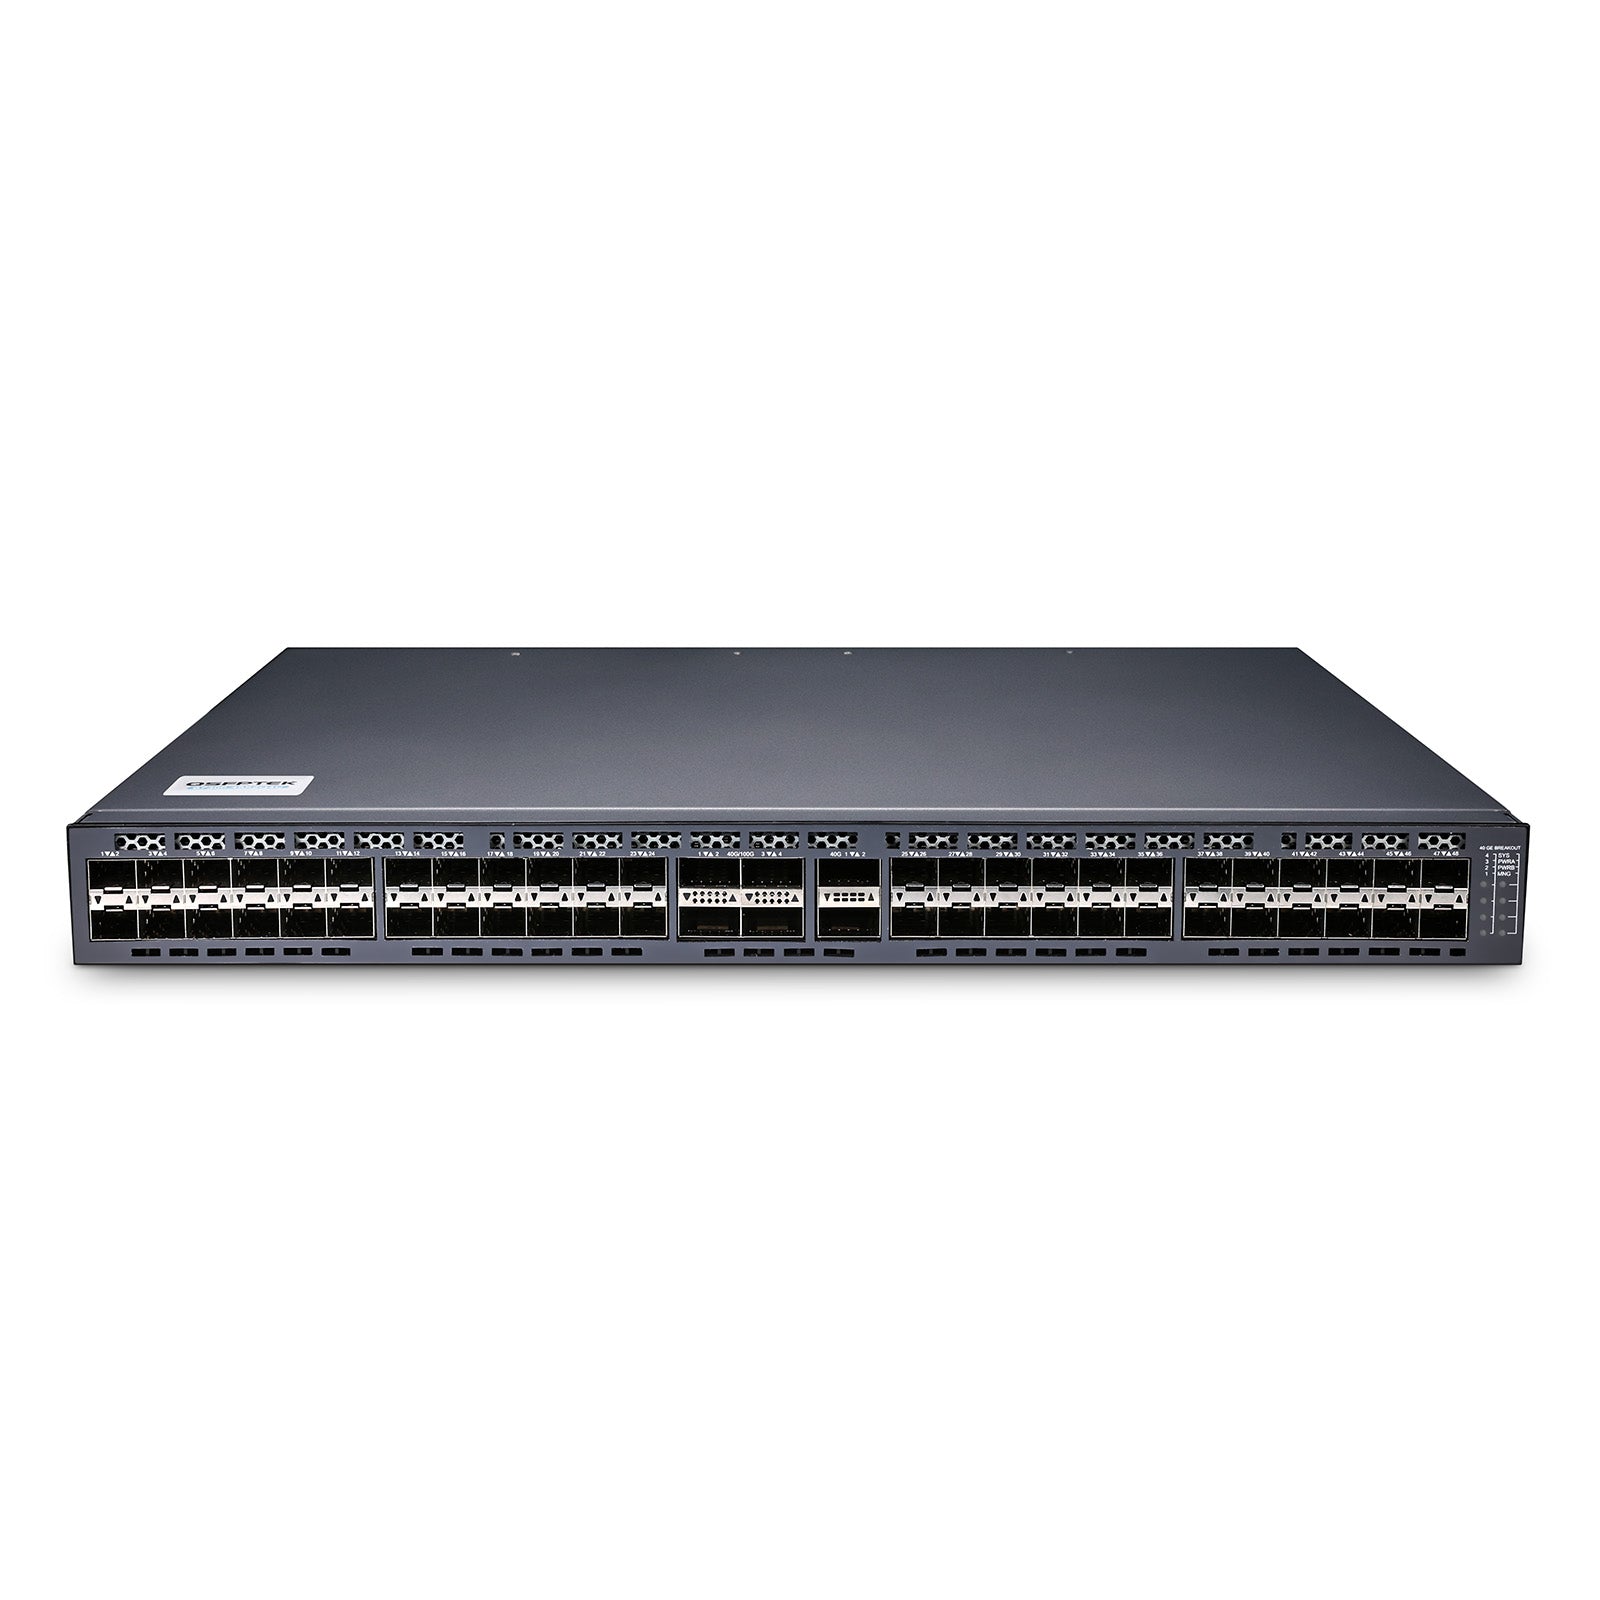 S7300-48X2Q4C, 48-Port Ethernet L3 Campus Switch, 48x10Gb SFP+, with 2x 40Gb QSFP+ and 4x 100Gb QSFP28 Uplinks, Support Stacking